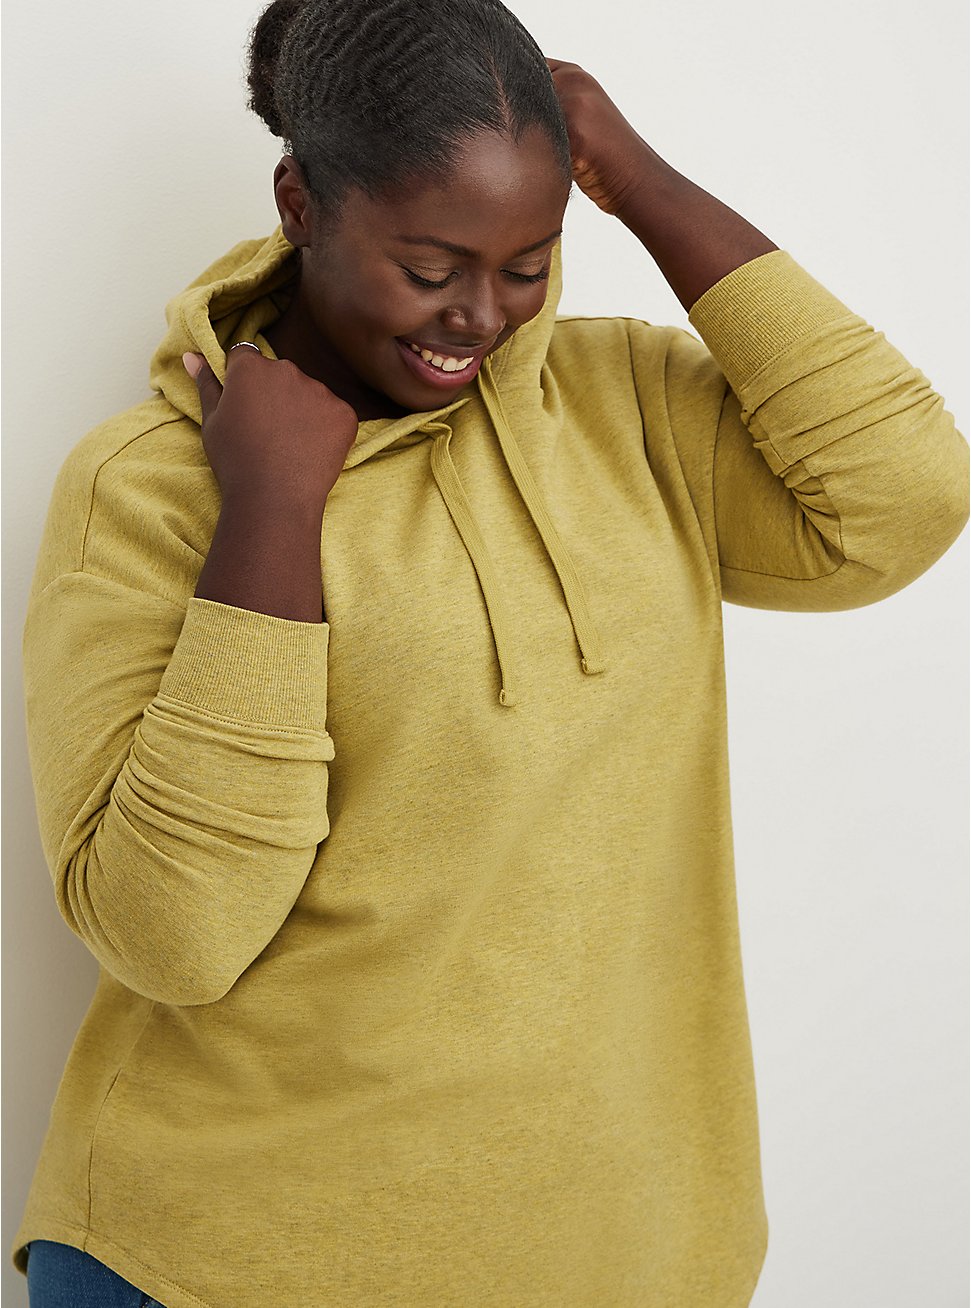 Plus Size Relaxed Fit Hoodie - Ultra Soft Fleece Golden Yellow, YELLOW, hi-res